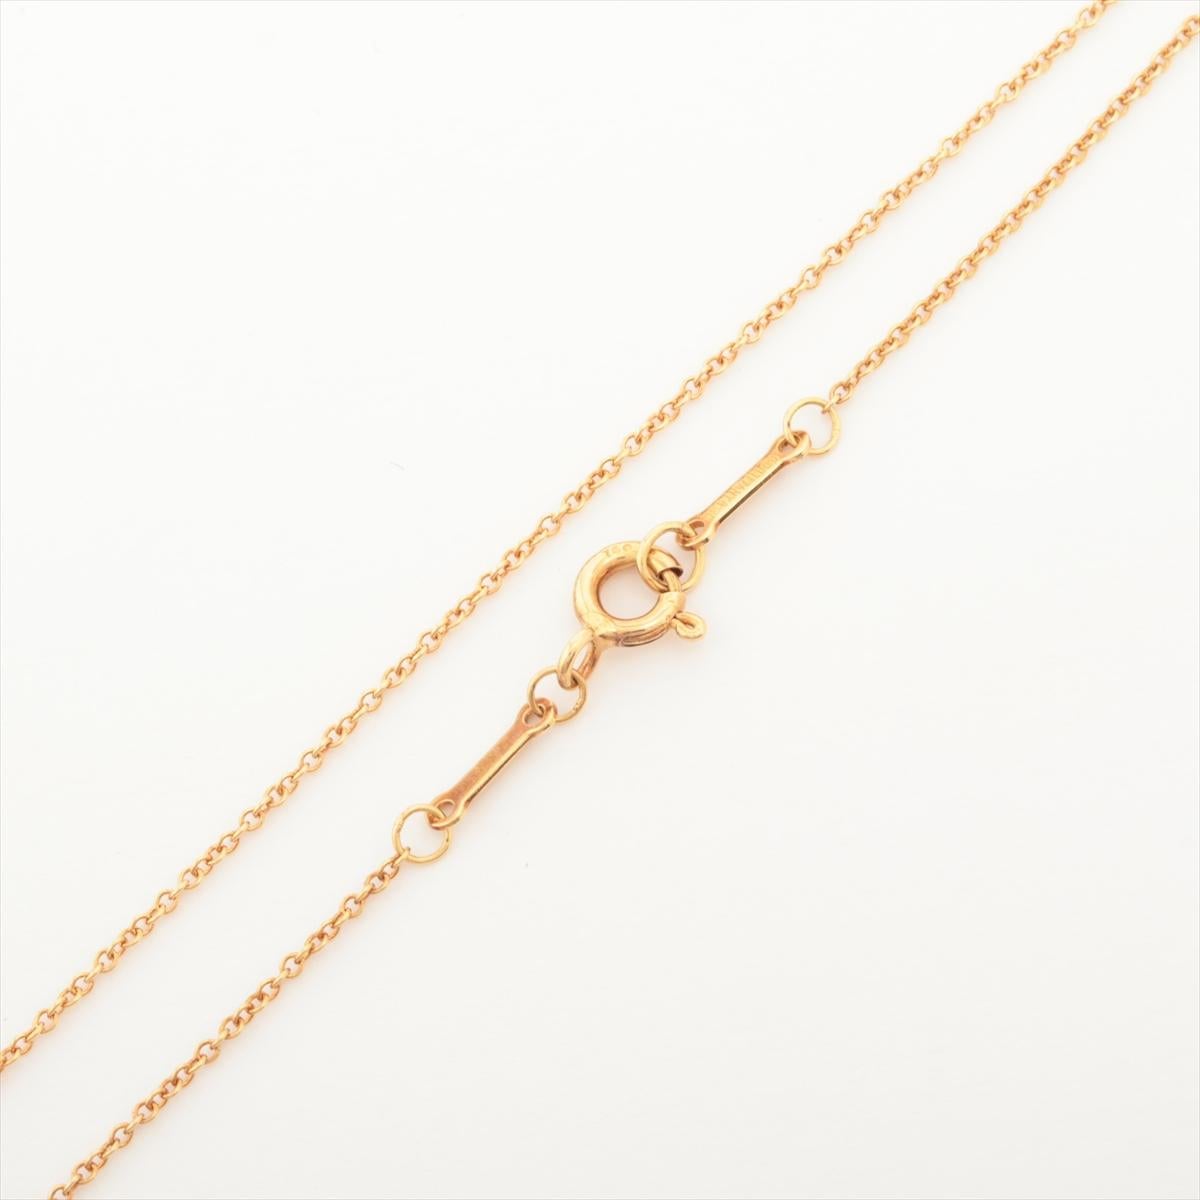 Tiffany & Co. Diamonds by the Yard Necklace Gold 2